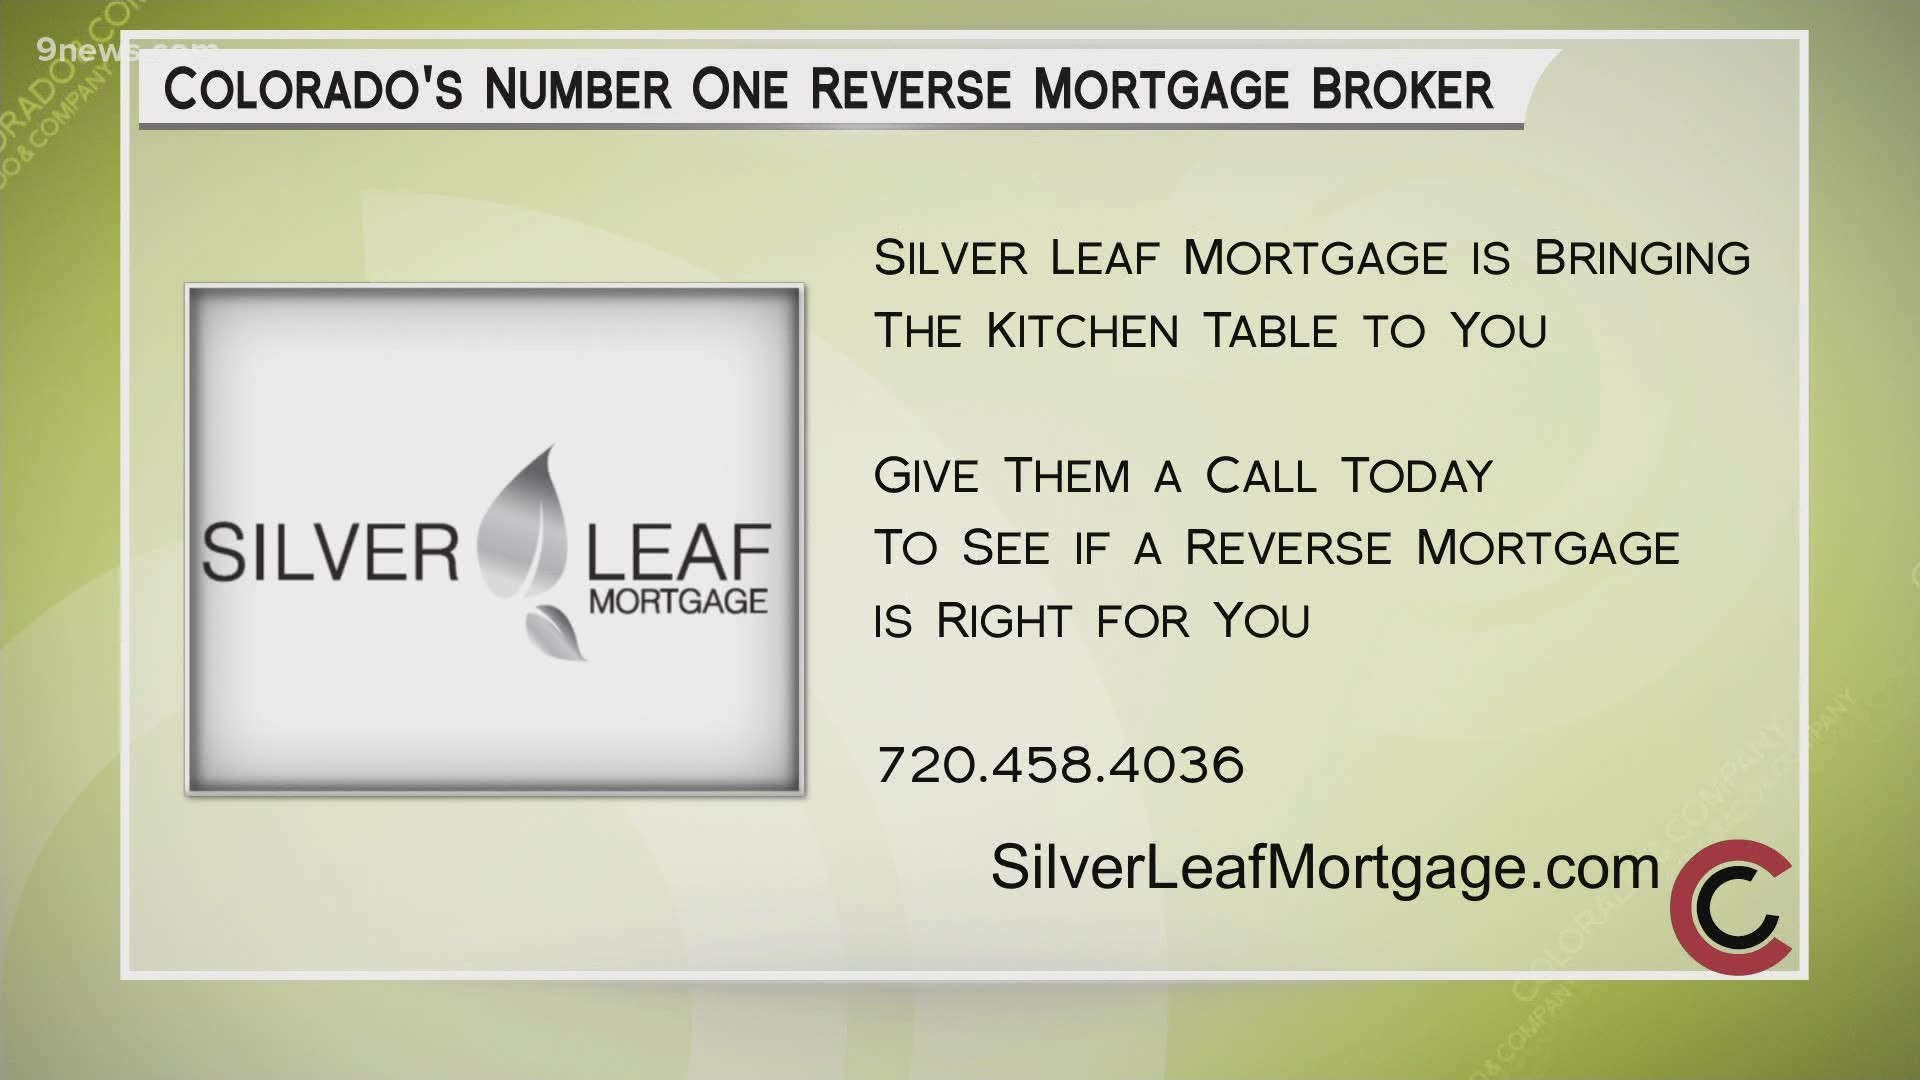 Call Silver Leaf and find out if a reverse mortgage is right for you. You can get started by calling 720.458.4036 or by visiting SilverLeafMortgage.com.